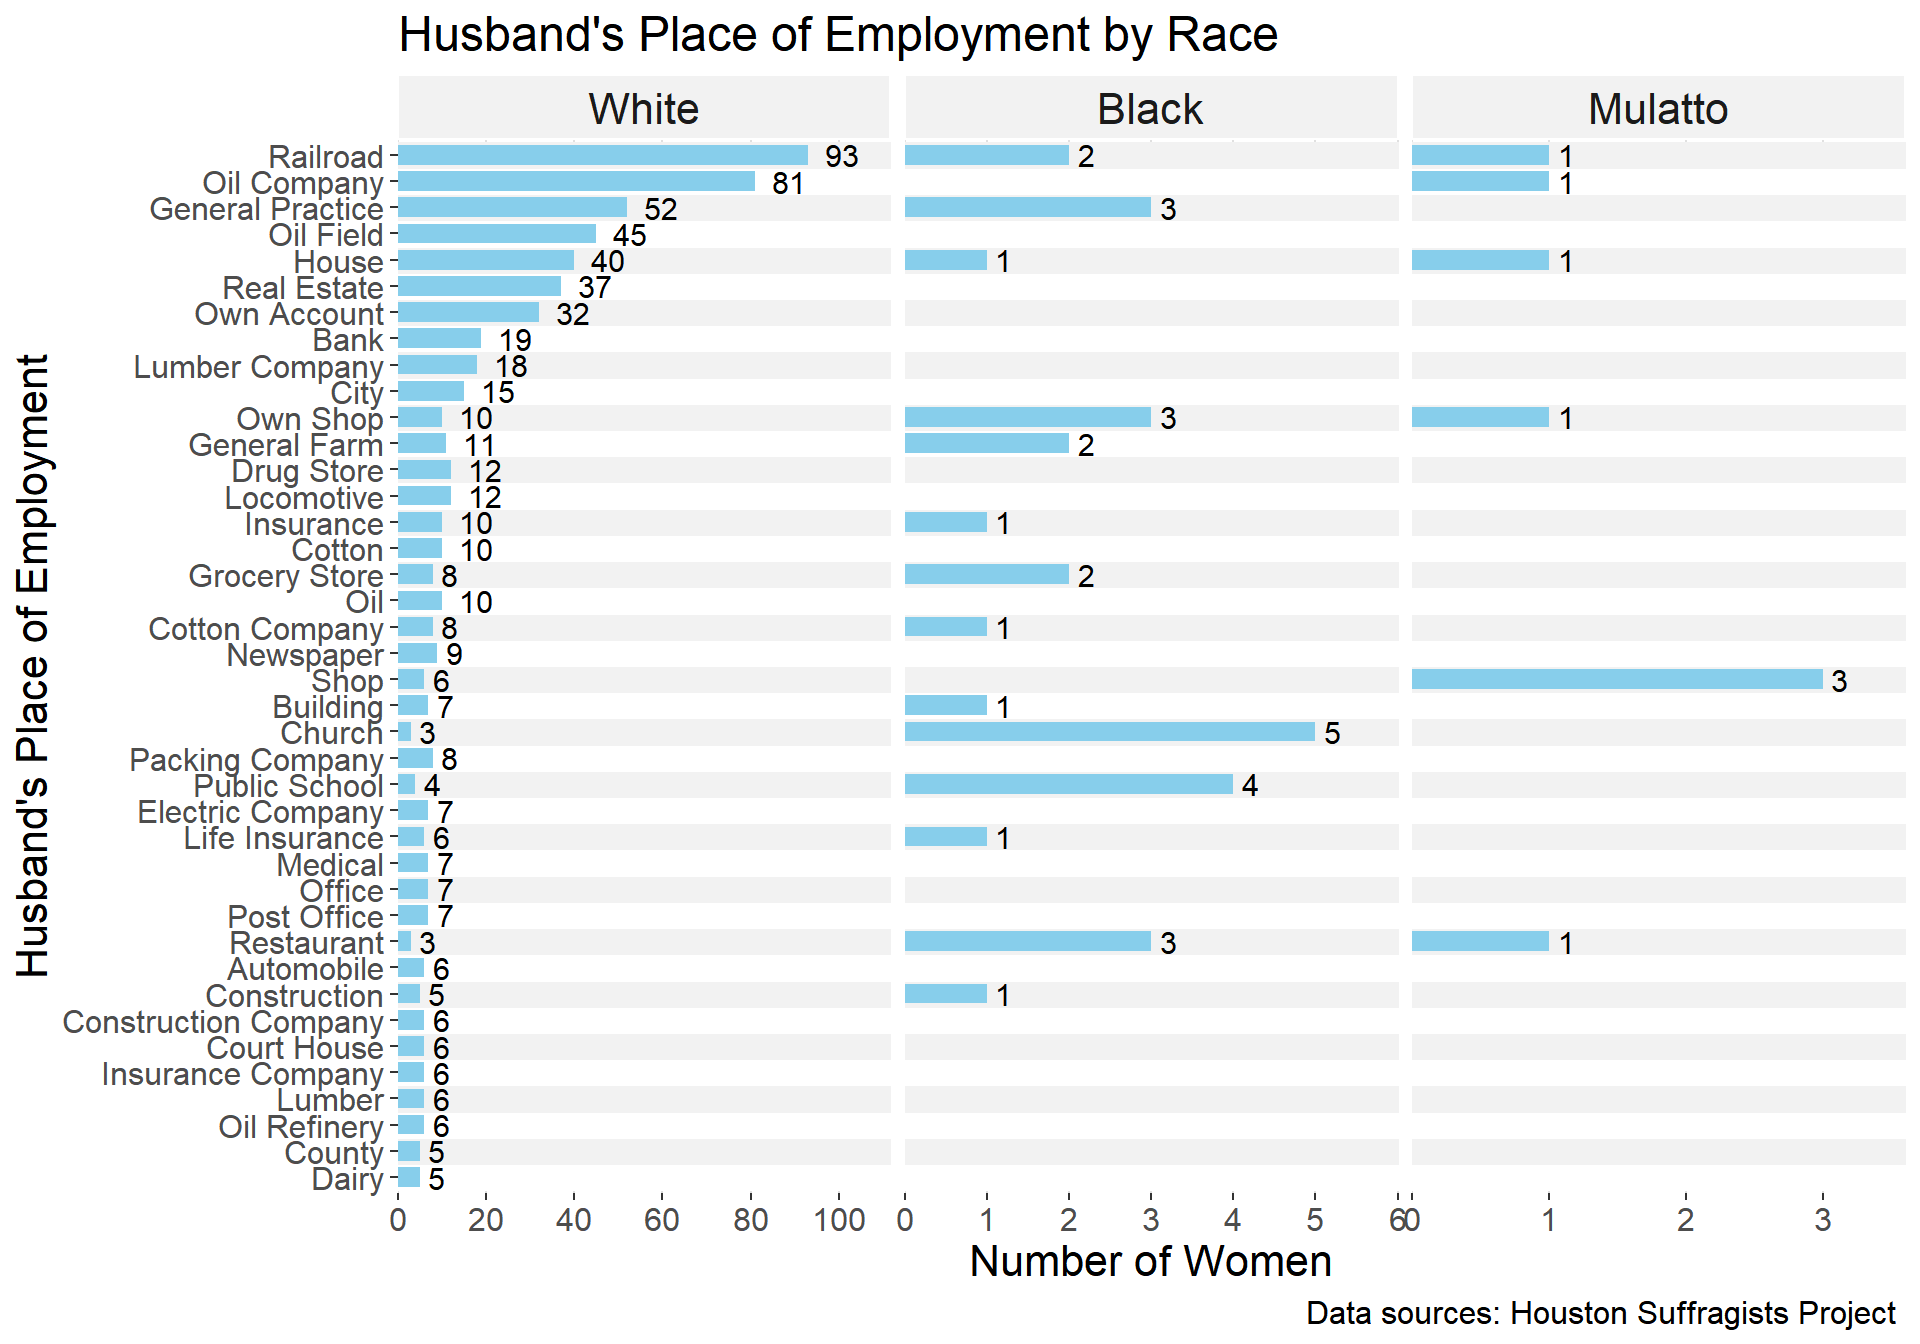 Chart 5  - Husband's Place of Employment